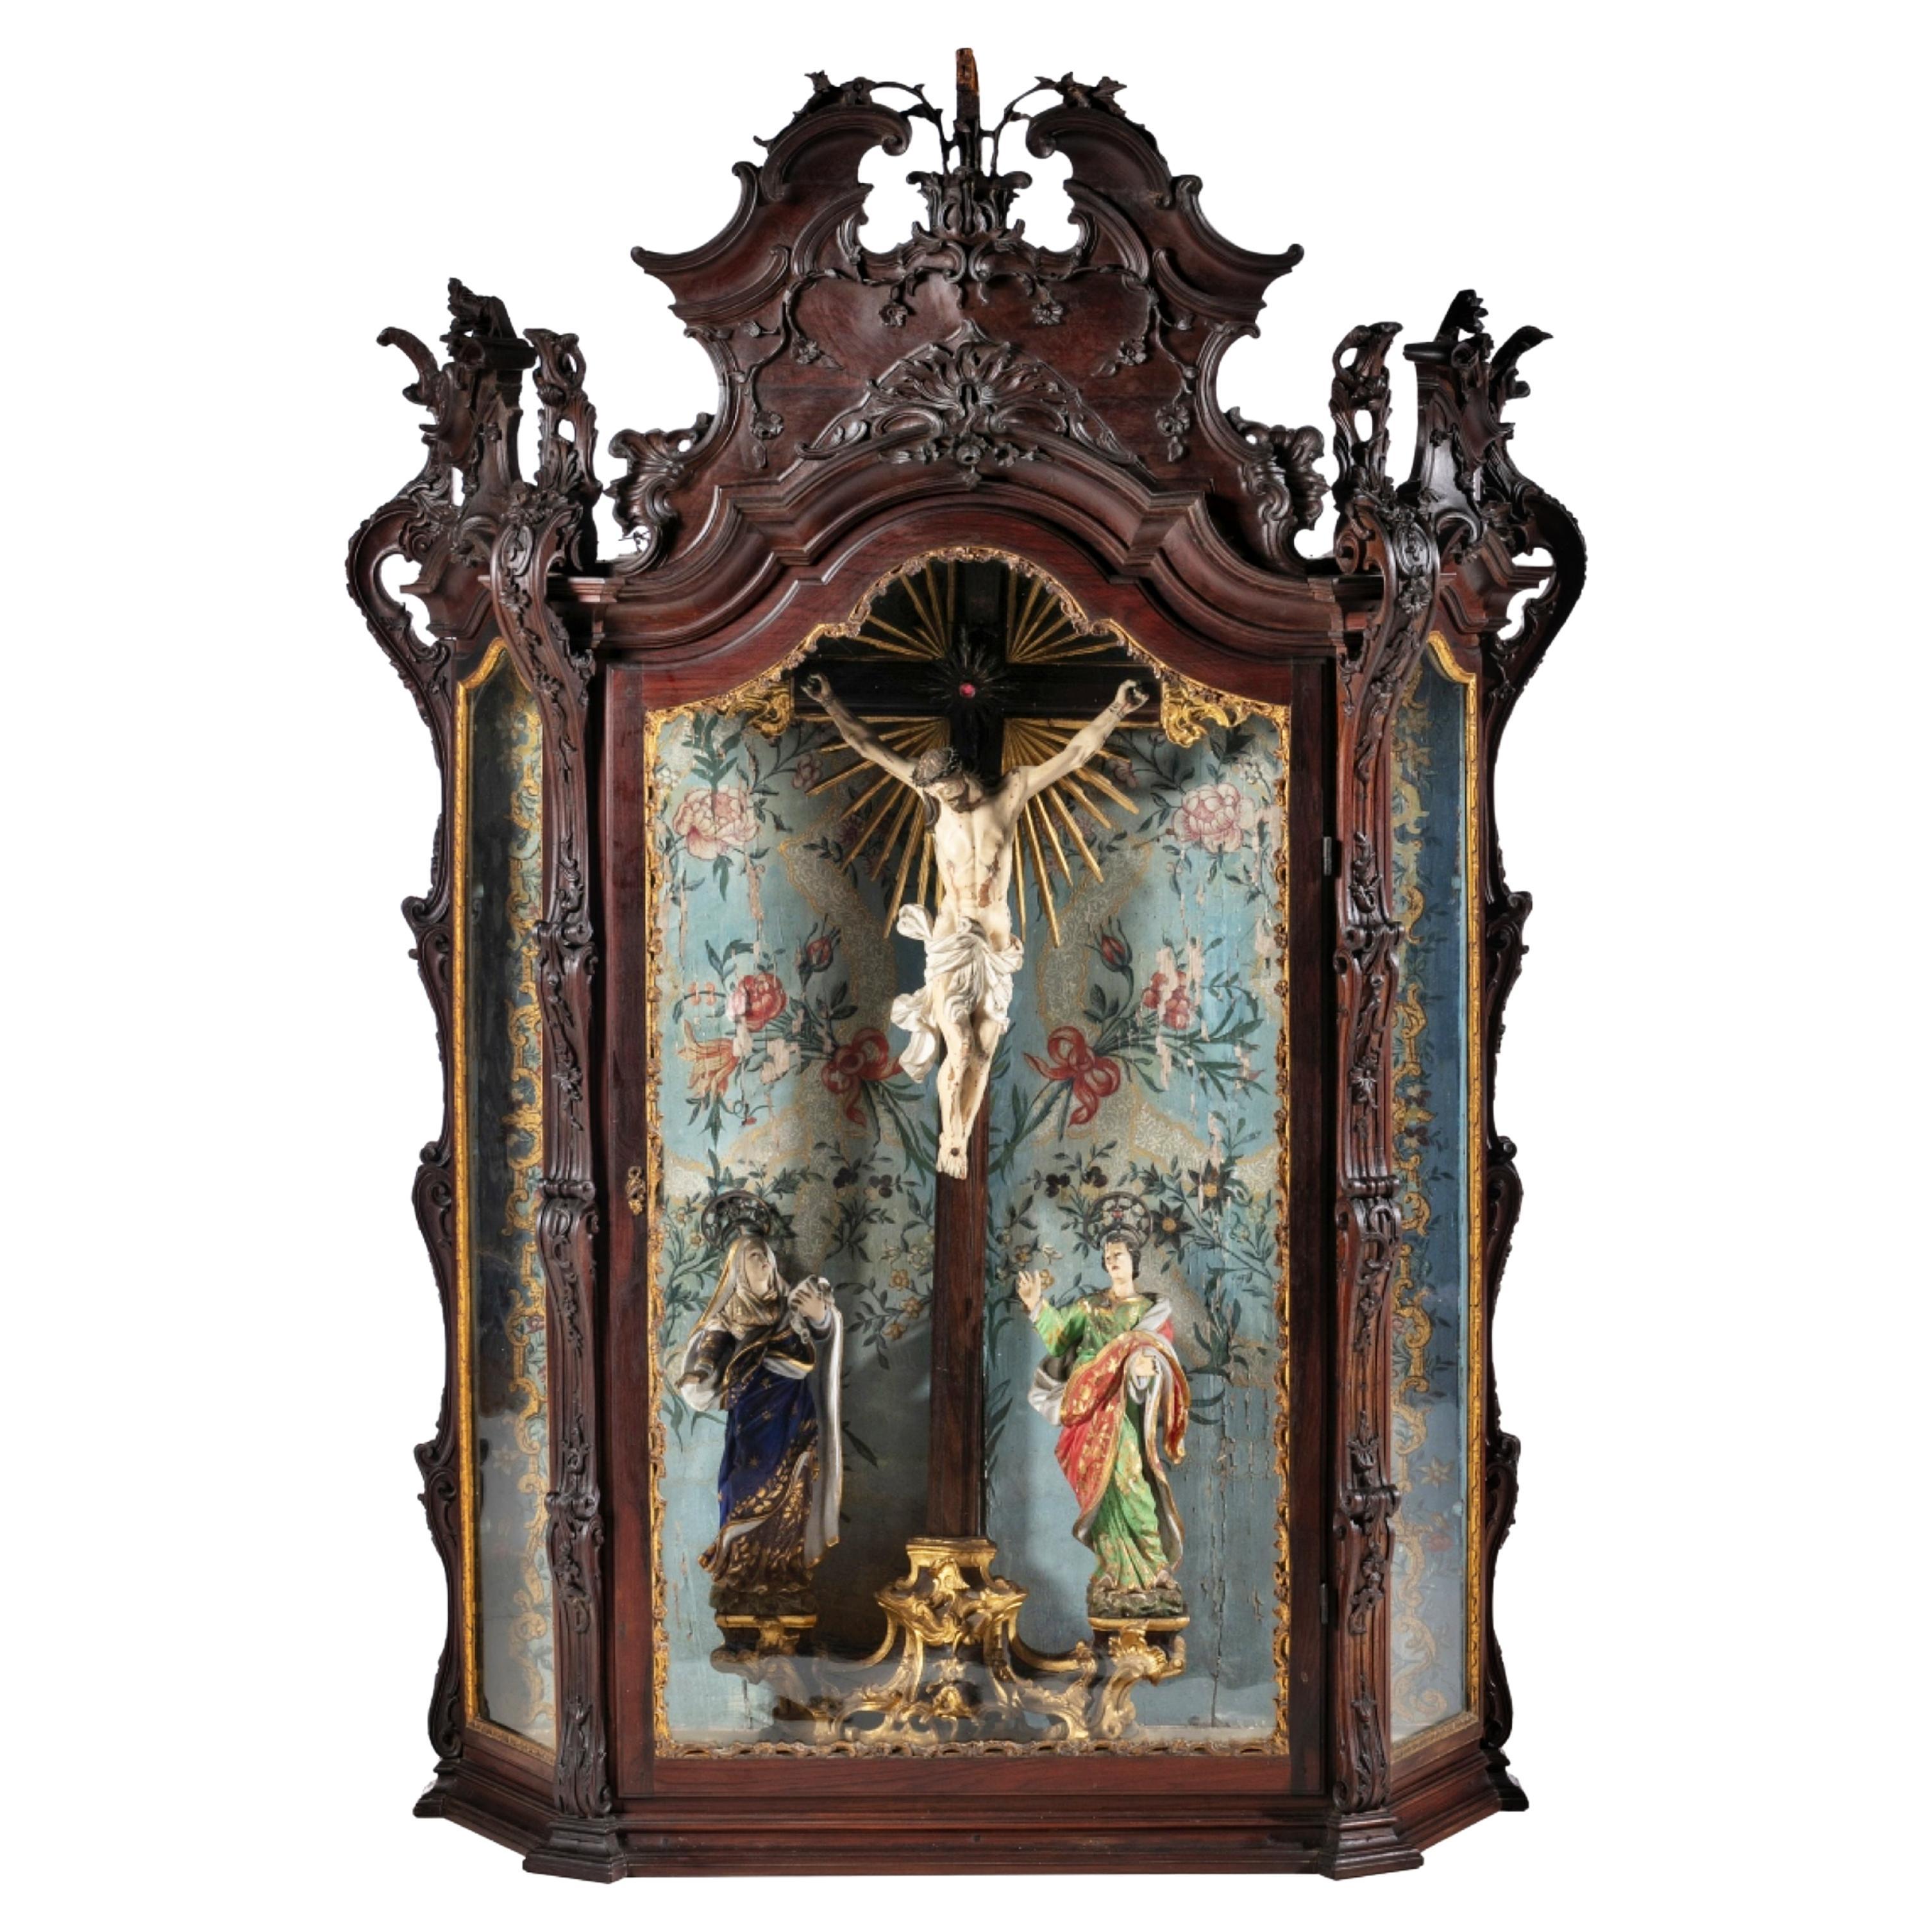 IMPORTANT PORTUGUESE ORATORY WITH CALVARY 18th Century